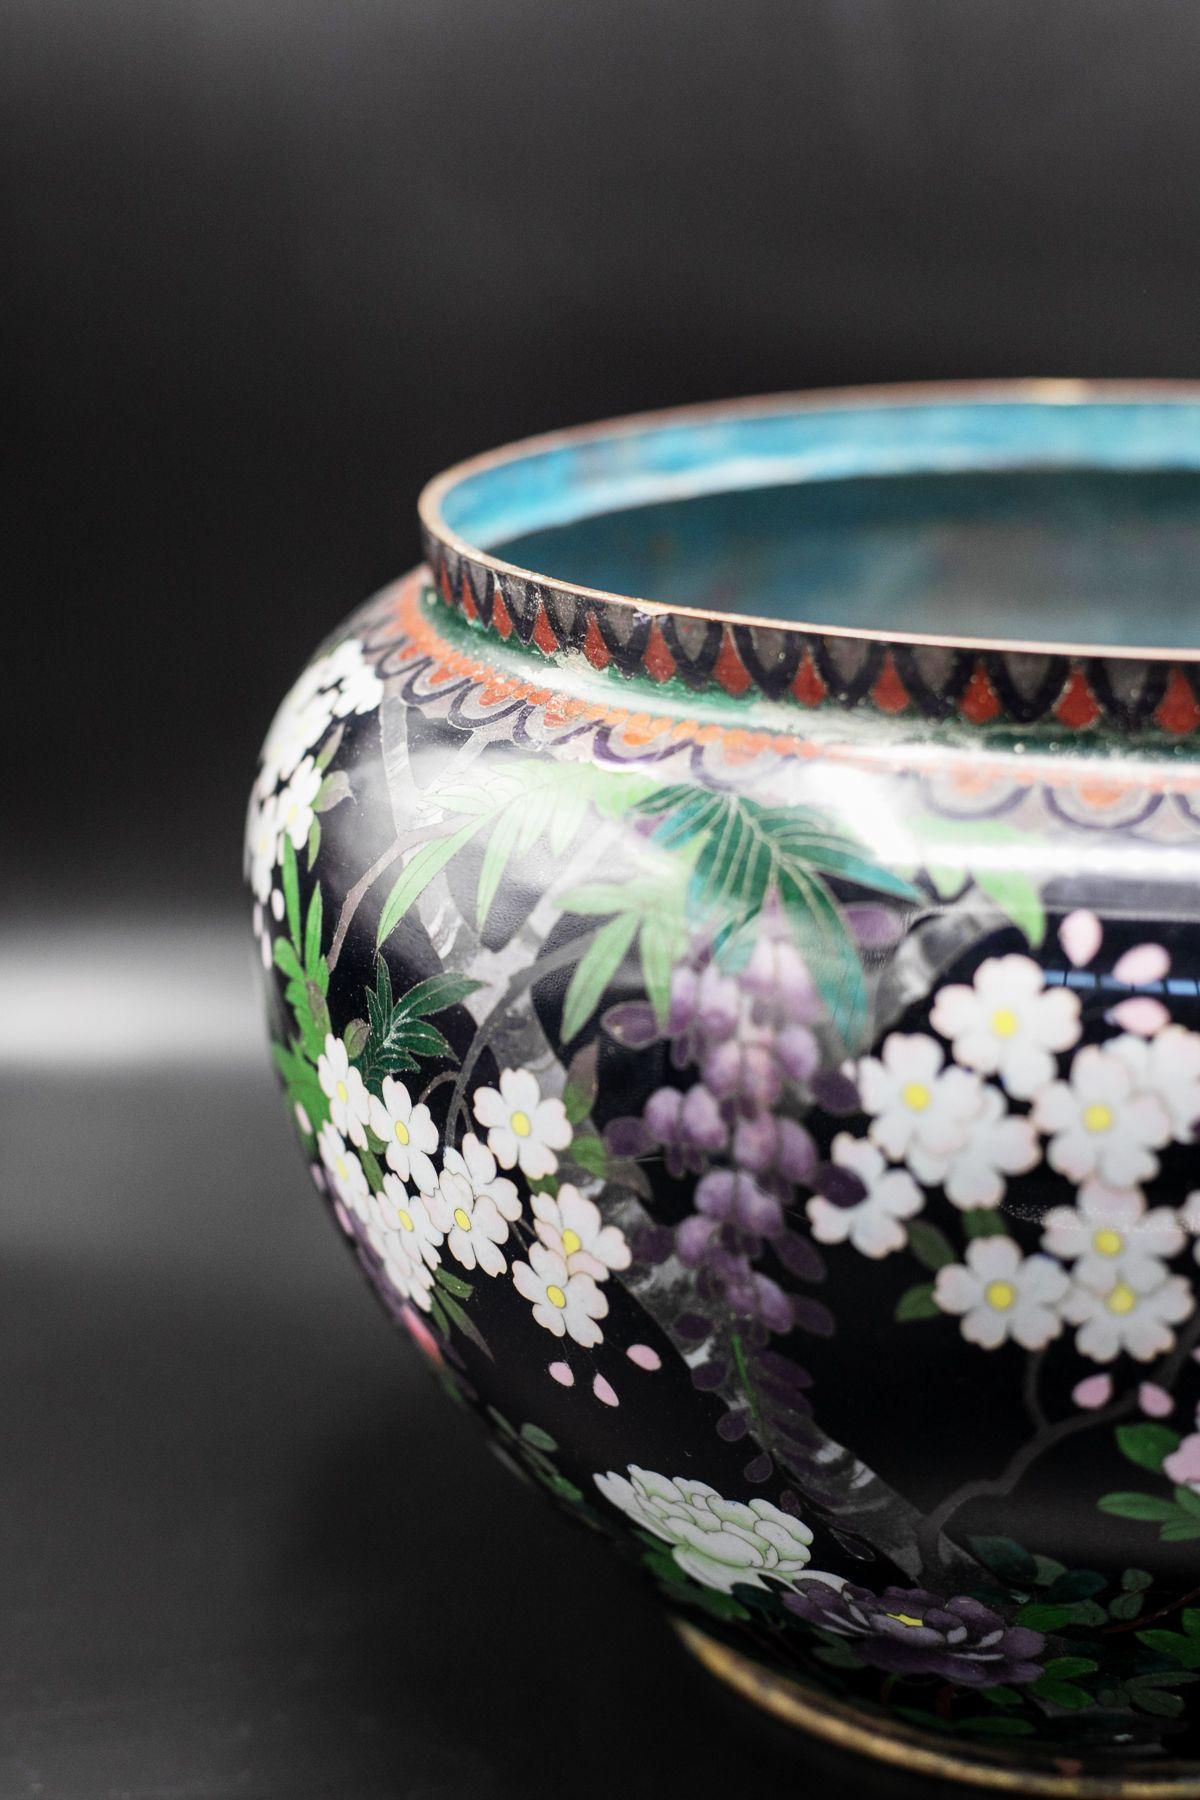 A beautiful decorated French cloisonné vase belonging to the 1900s, of fine French manufacture.
The vase has a smaller but round base bordered in gold. The vase then widens to take an ovoid shape and narrows again at the neck. The neck is traversed